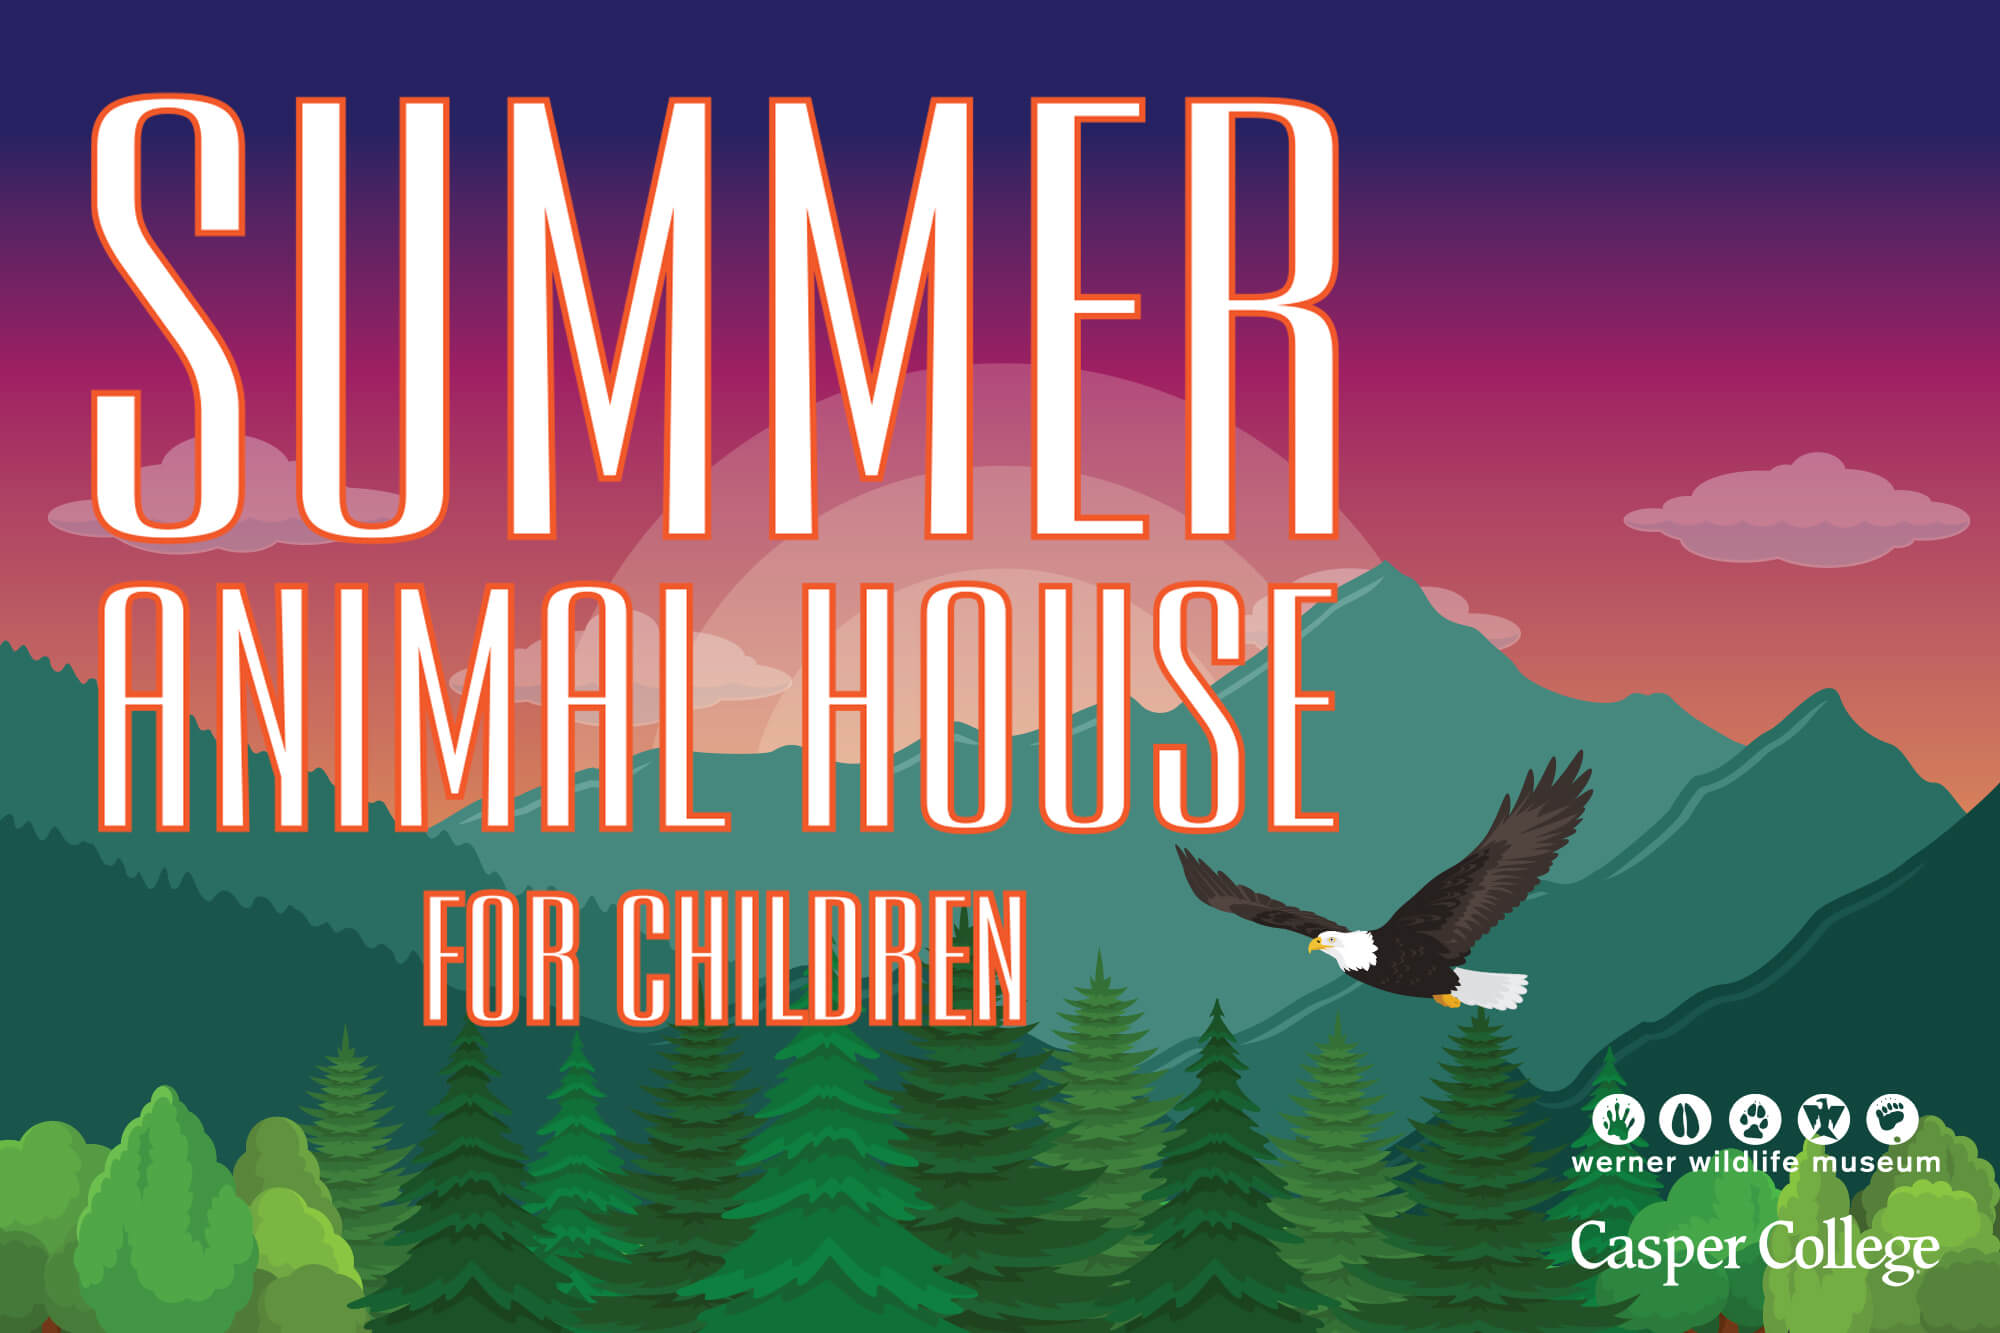 Image for "Summer Animal House" press release.